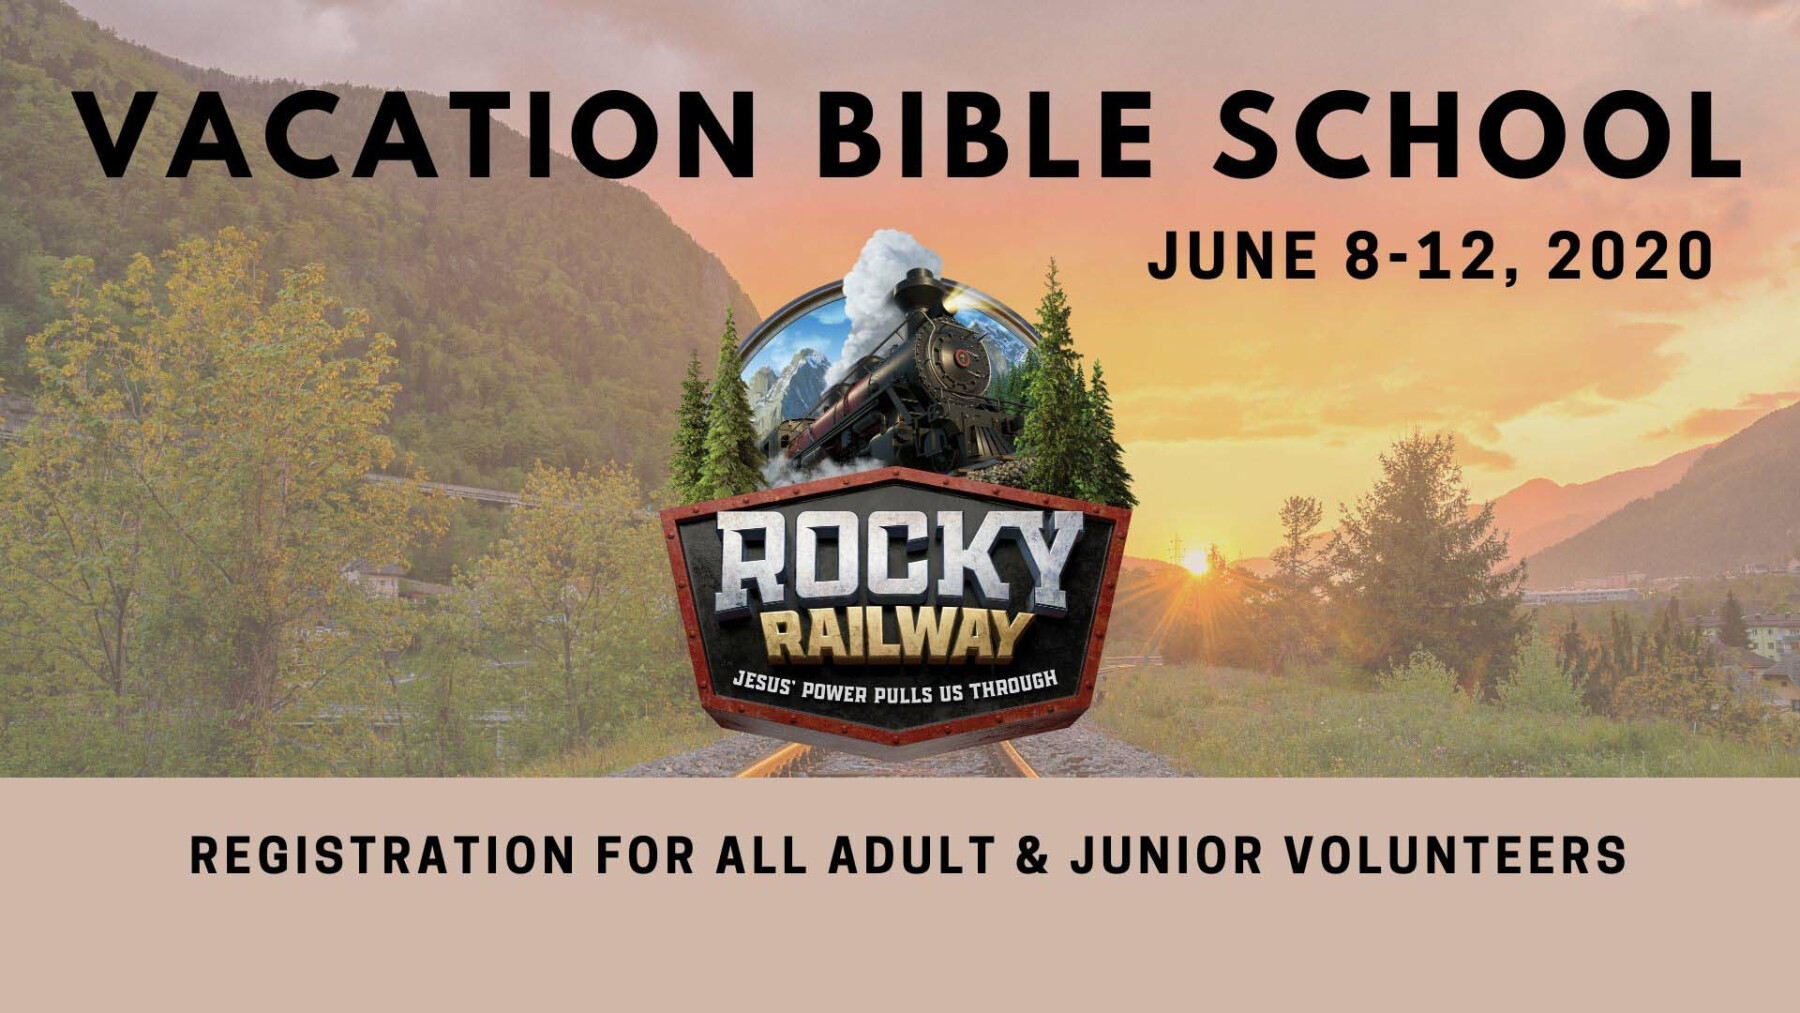 VBS Registration for Adults and Junior Volunteers